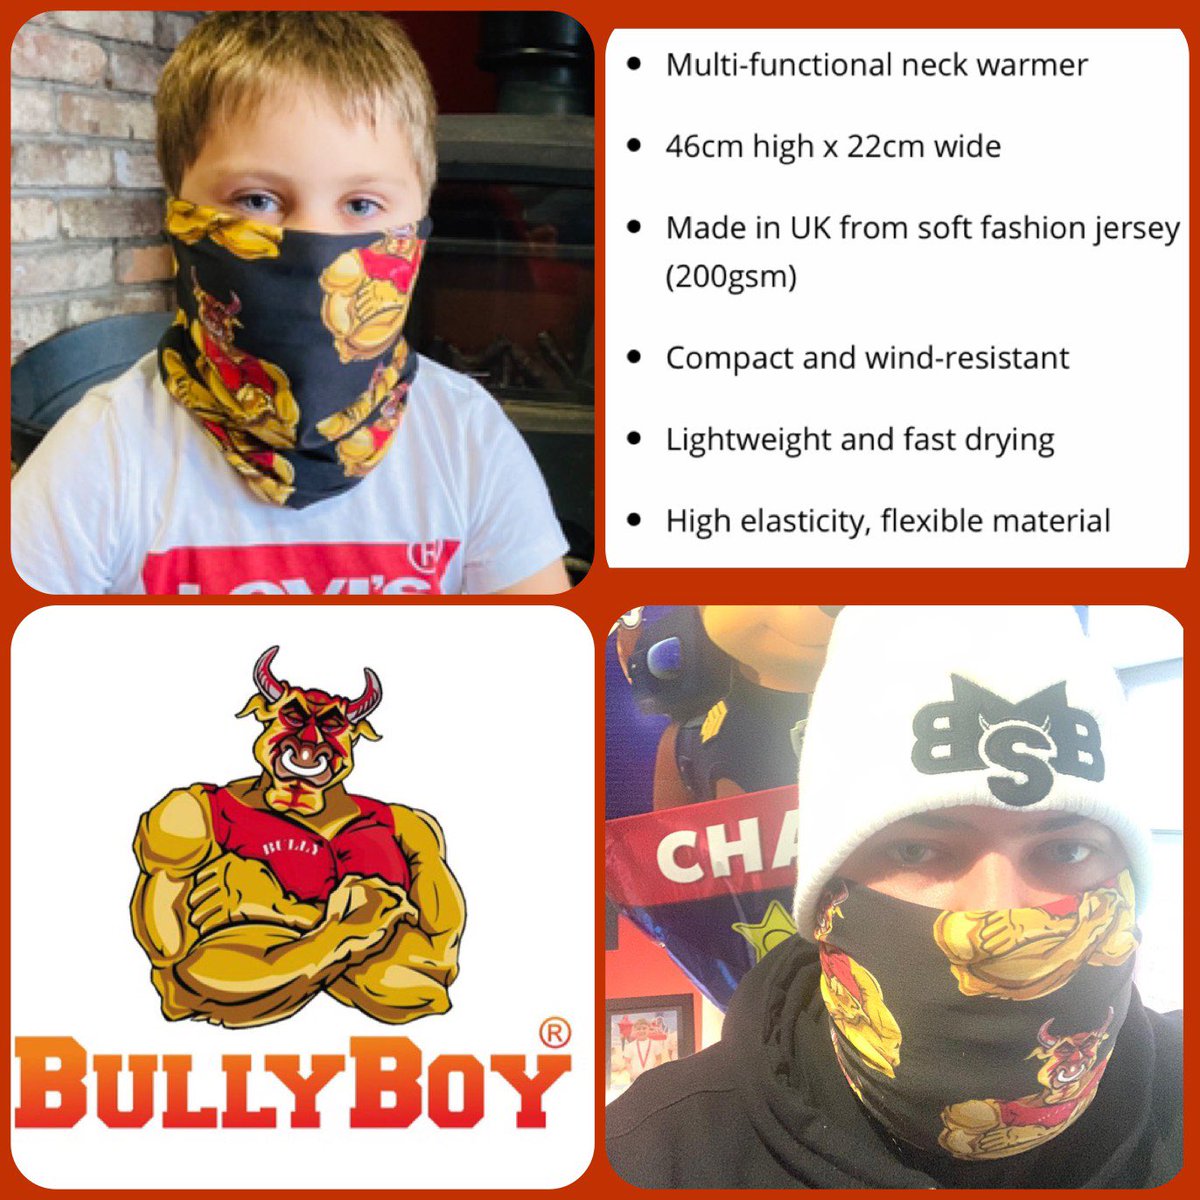 We have neck warmers available for sale also normal masks too if anyone interested. Shipped worldwide. Please message me for details @BullyBoy180